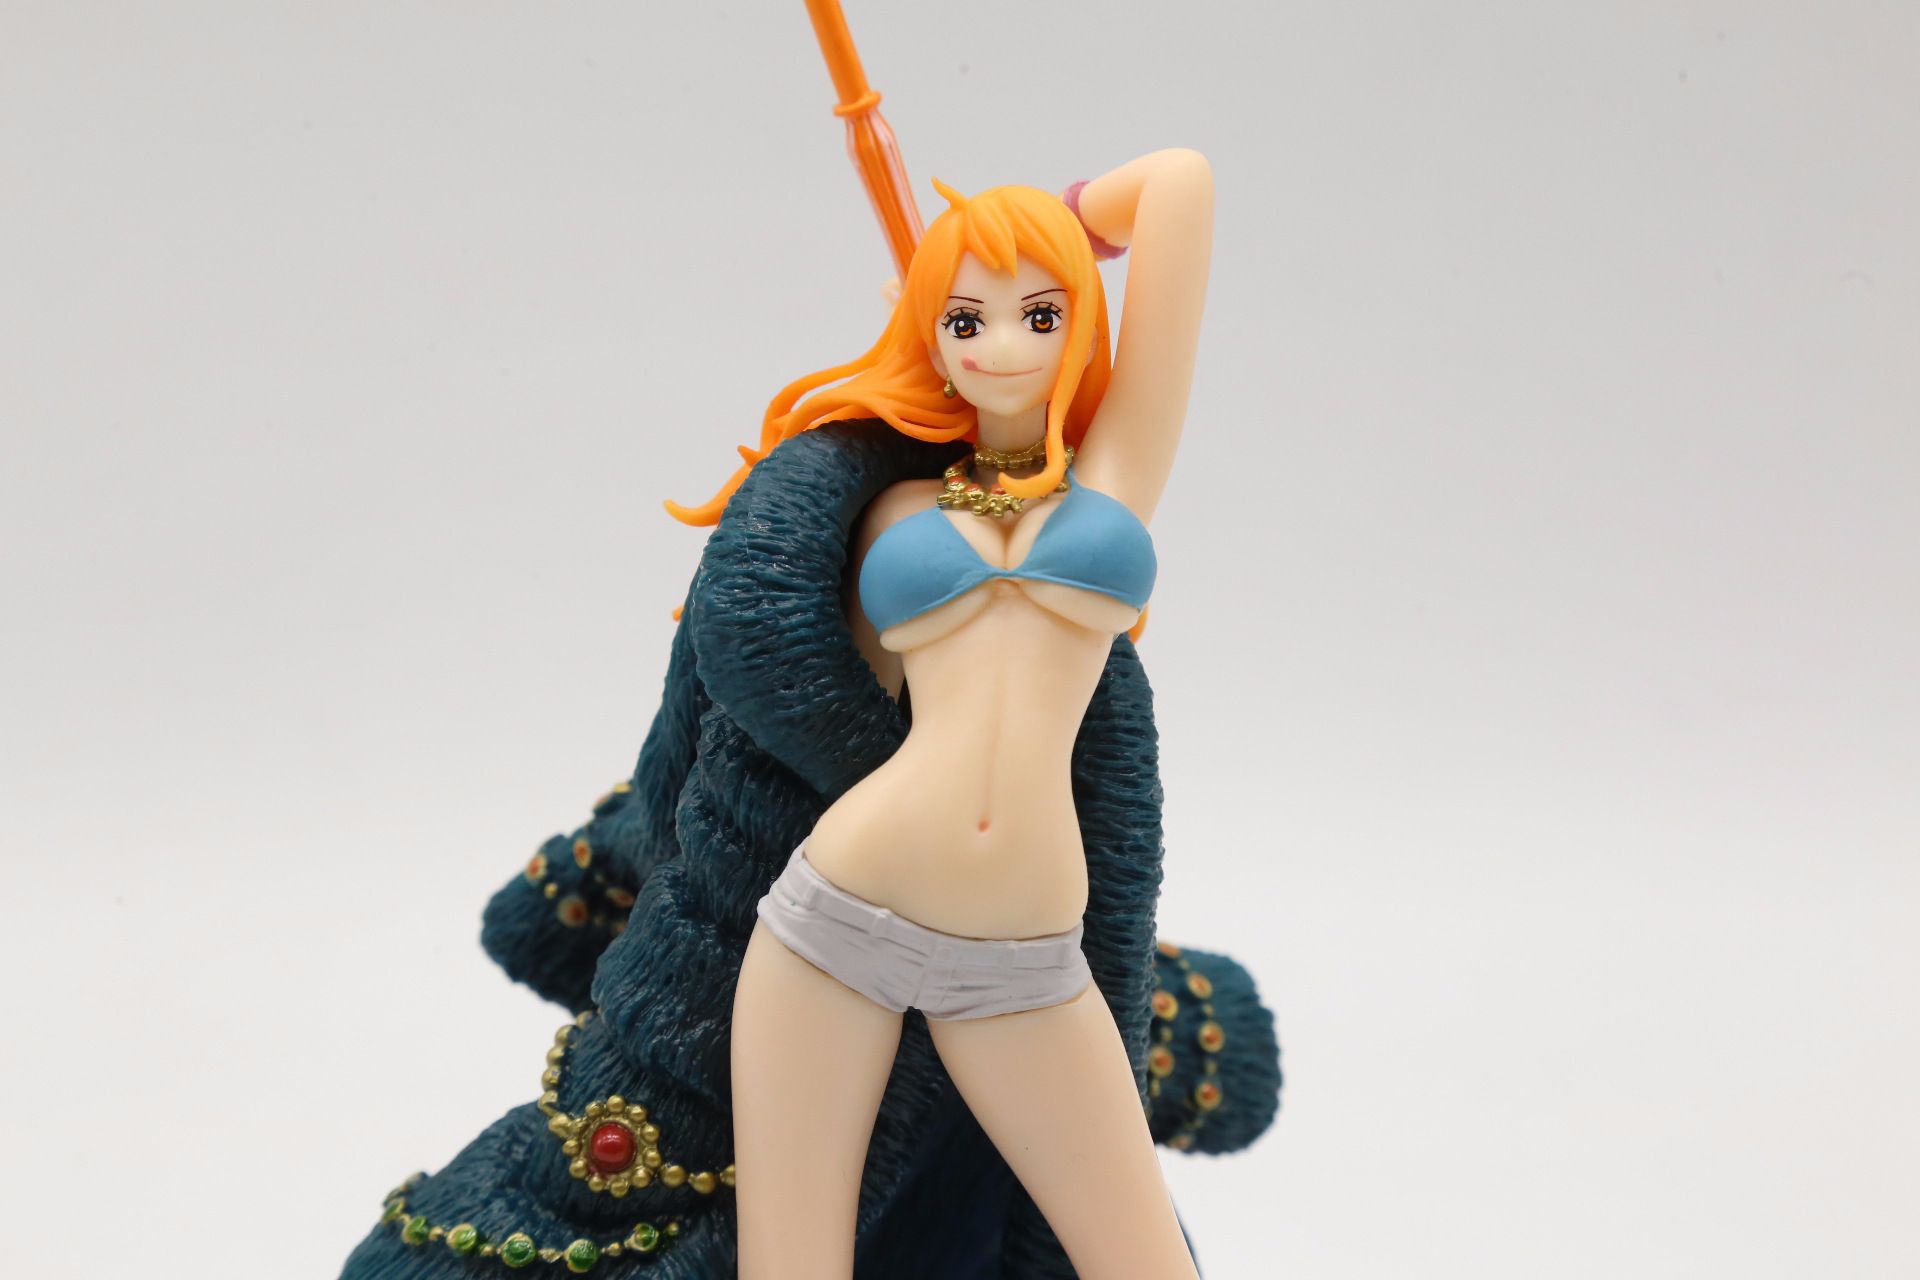 2019 One Piece Pop Nami Luffy Blue Hot Toy Sexy Action Figure Art Girl Big Boobs Tokyo Japan